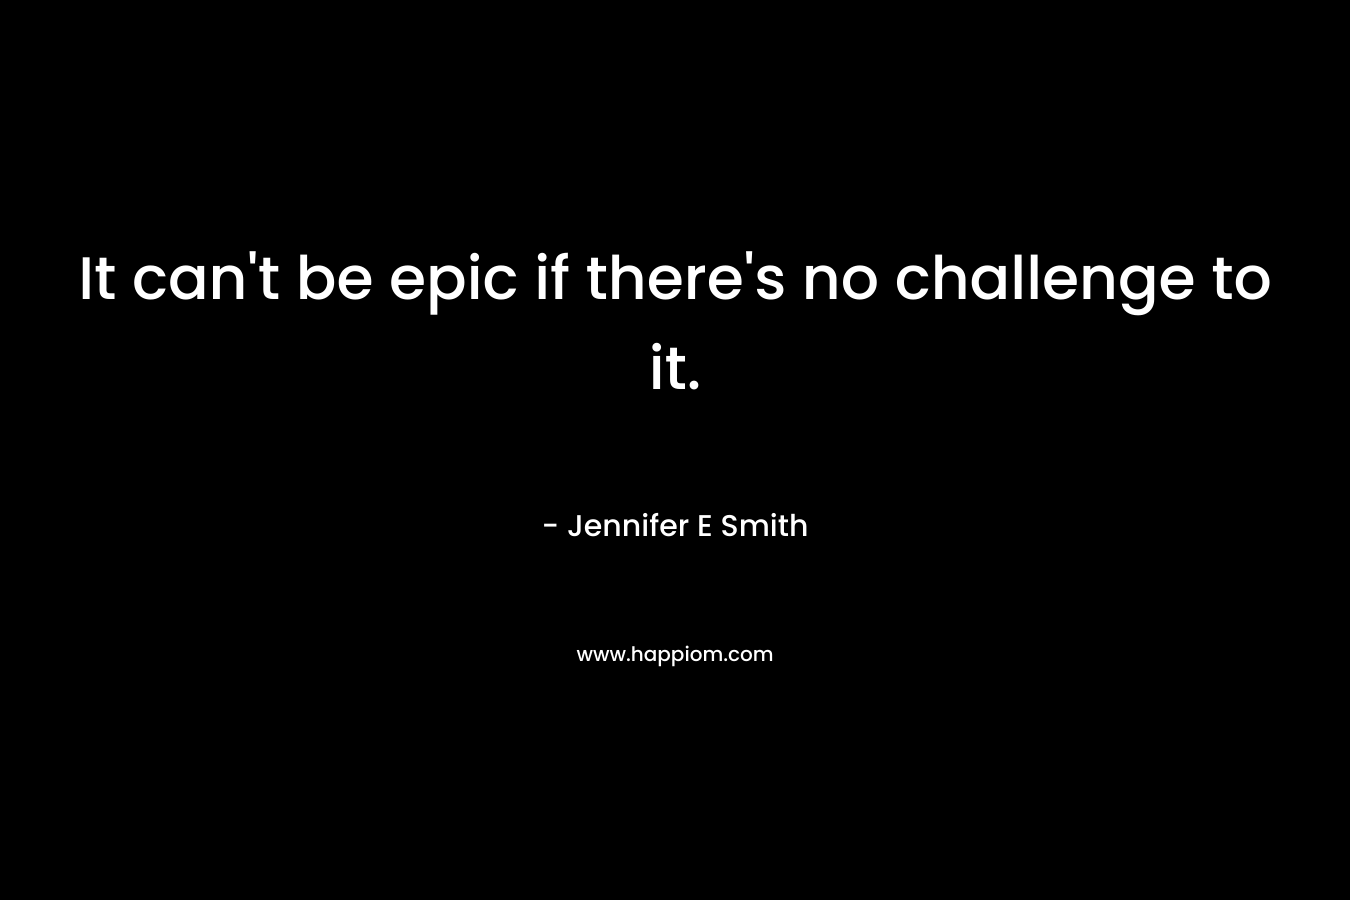 It can't be epic if there's no challenge to it.